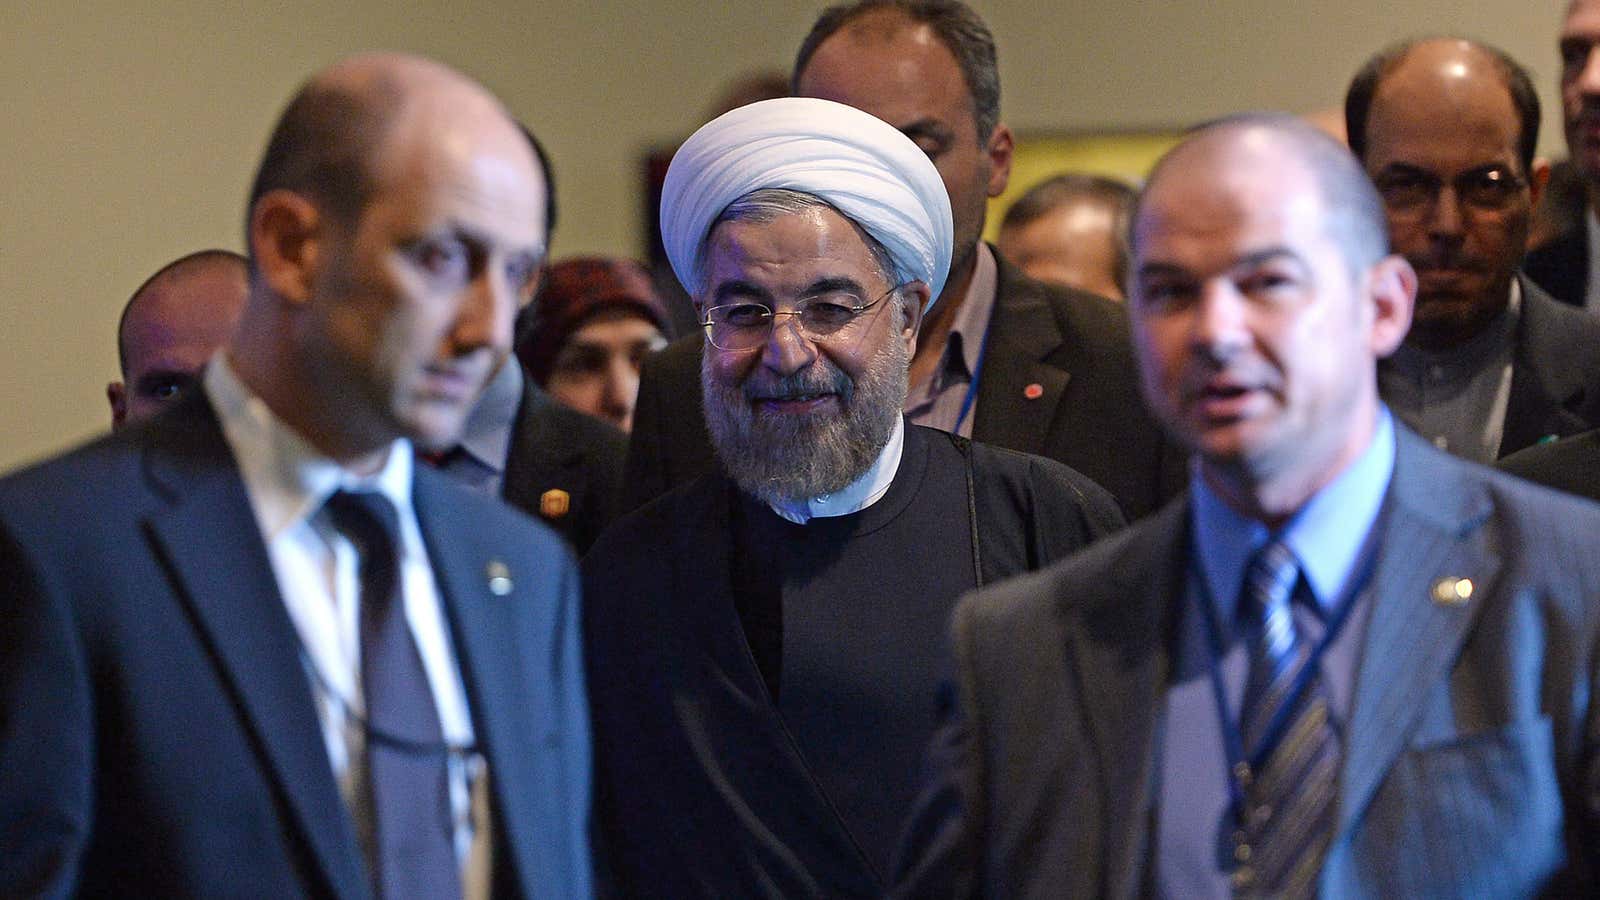 Iran’s President Hassan Rouhani may not get the reception he’s used to at the UNGA.